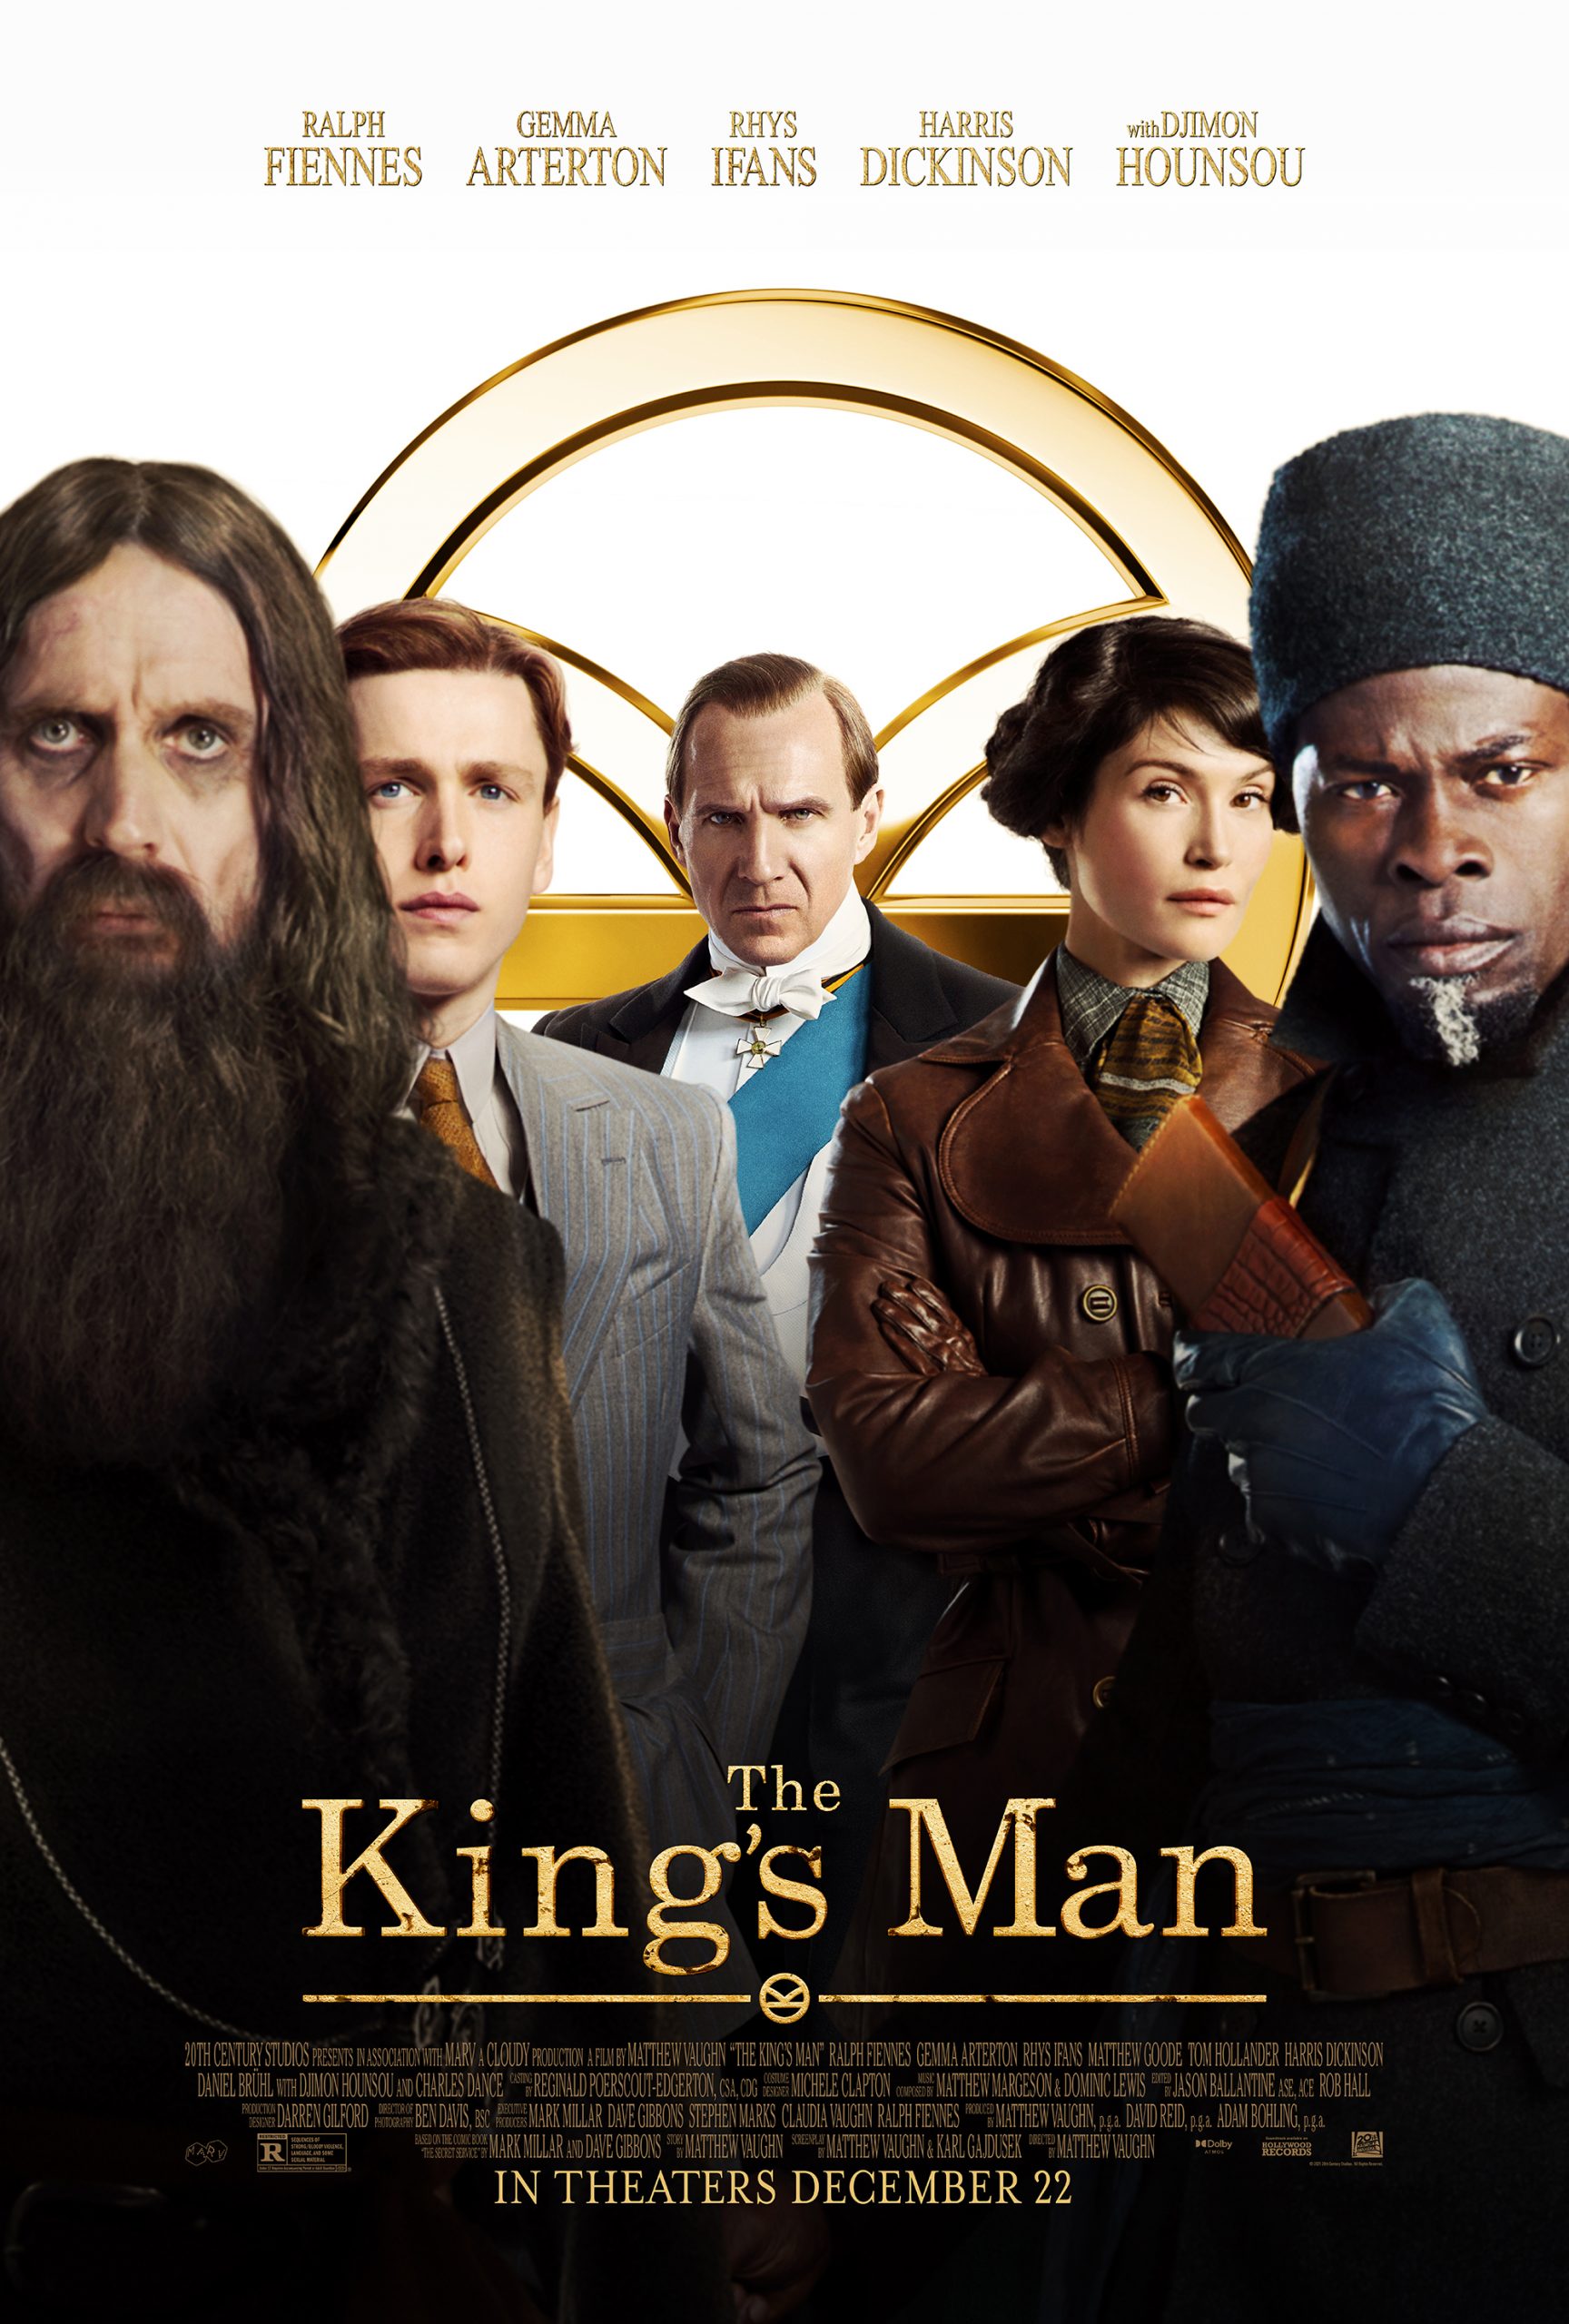 The King's Man DVD Cover